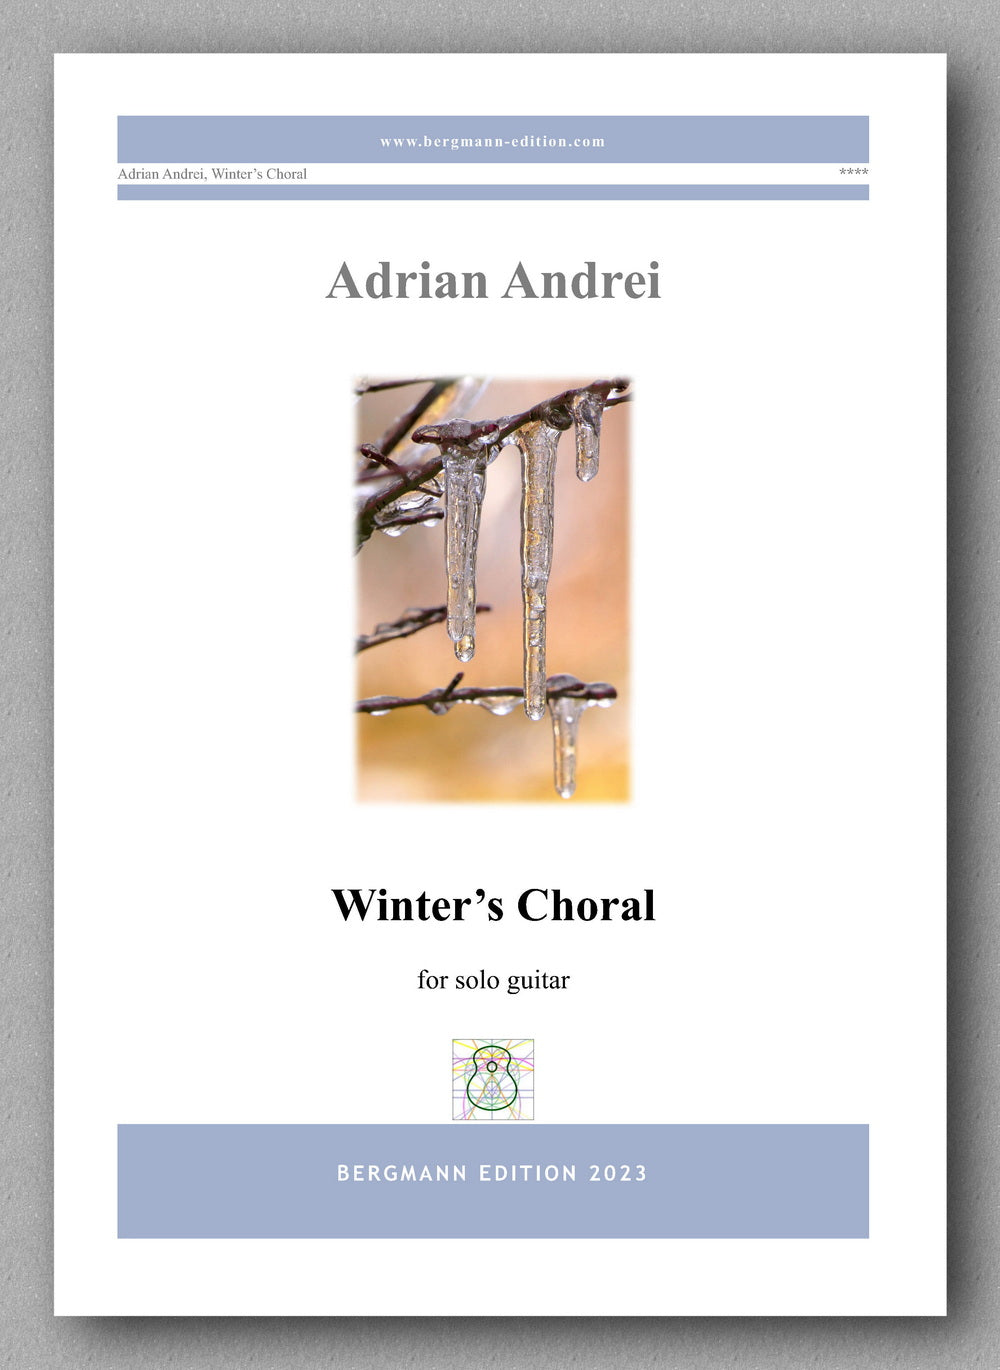 Adrian Andrei, Winter’s Choral - preview of the cover